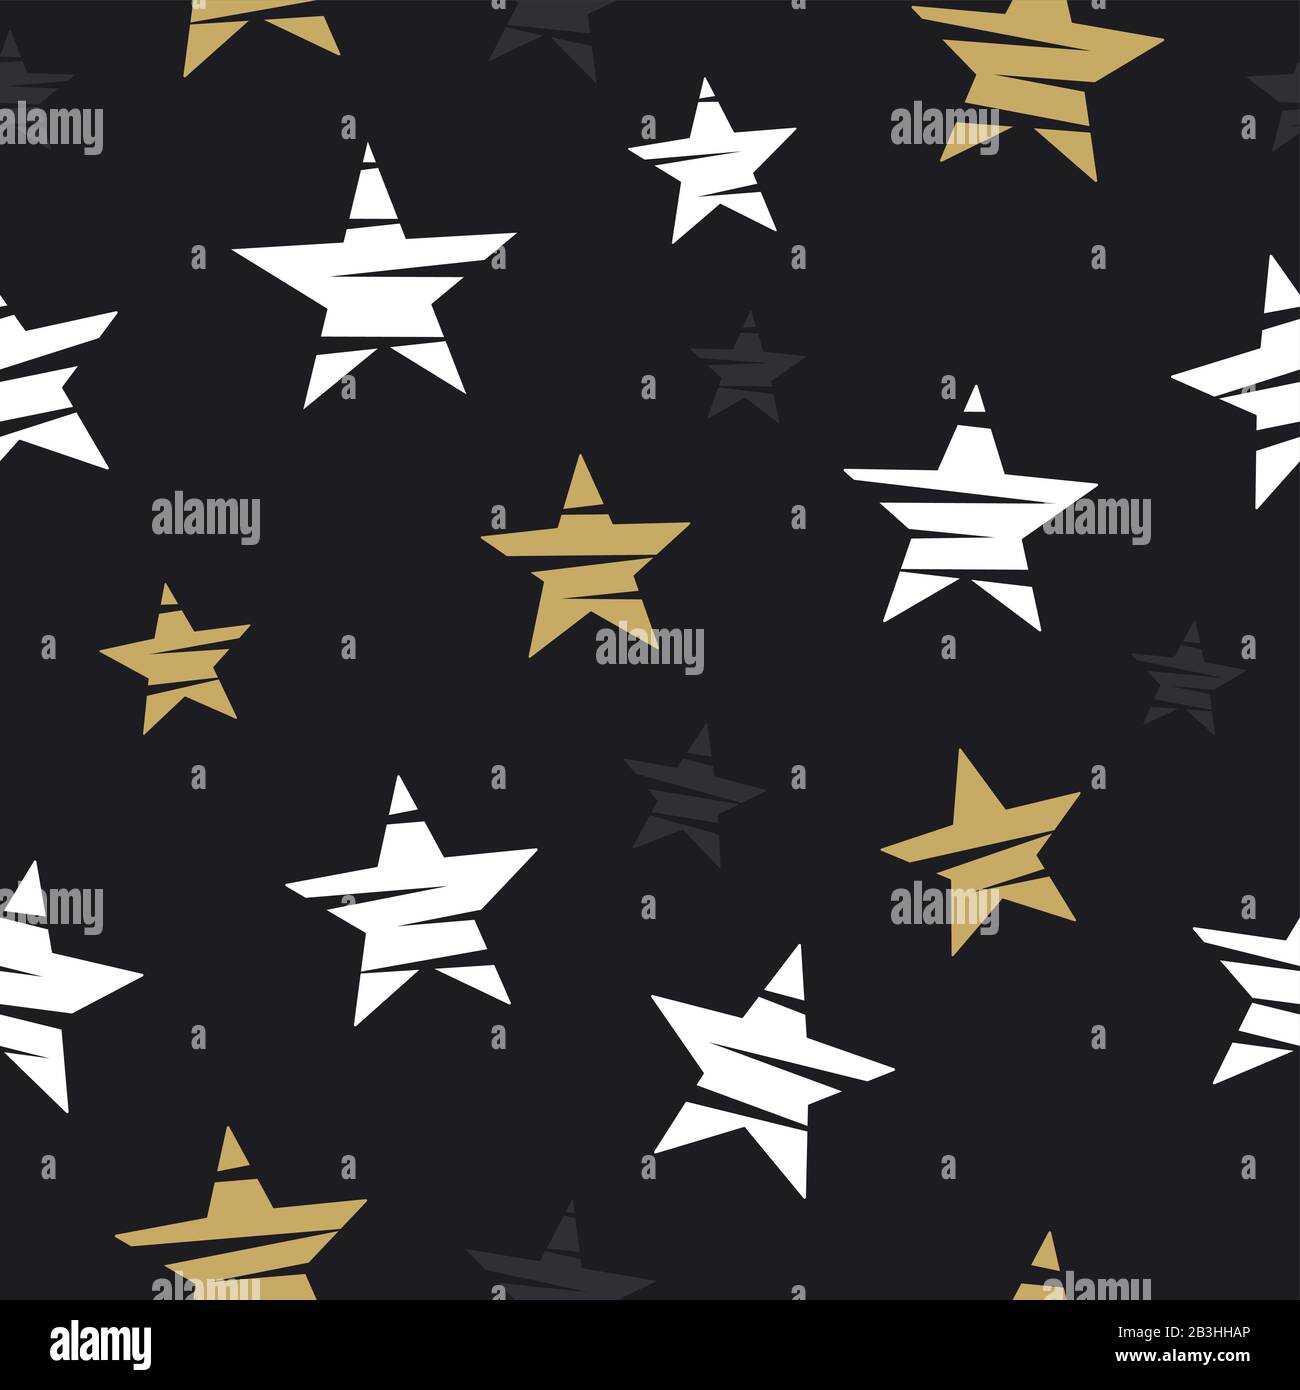 Stars seamless pattern. Trendy abstract endless background with gold and white glittering stars. Vector Stock Vector